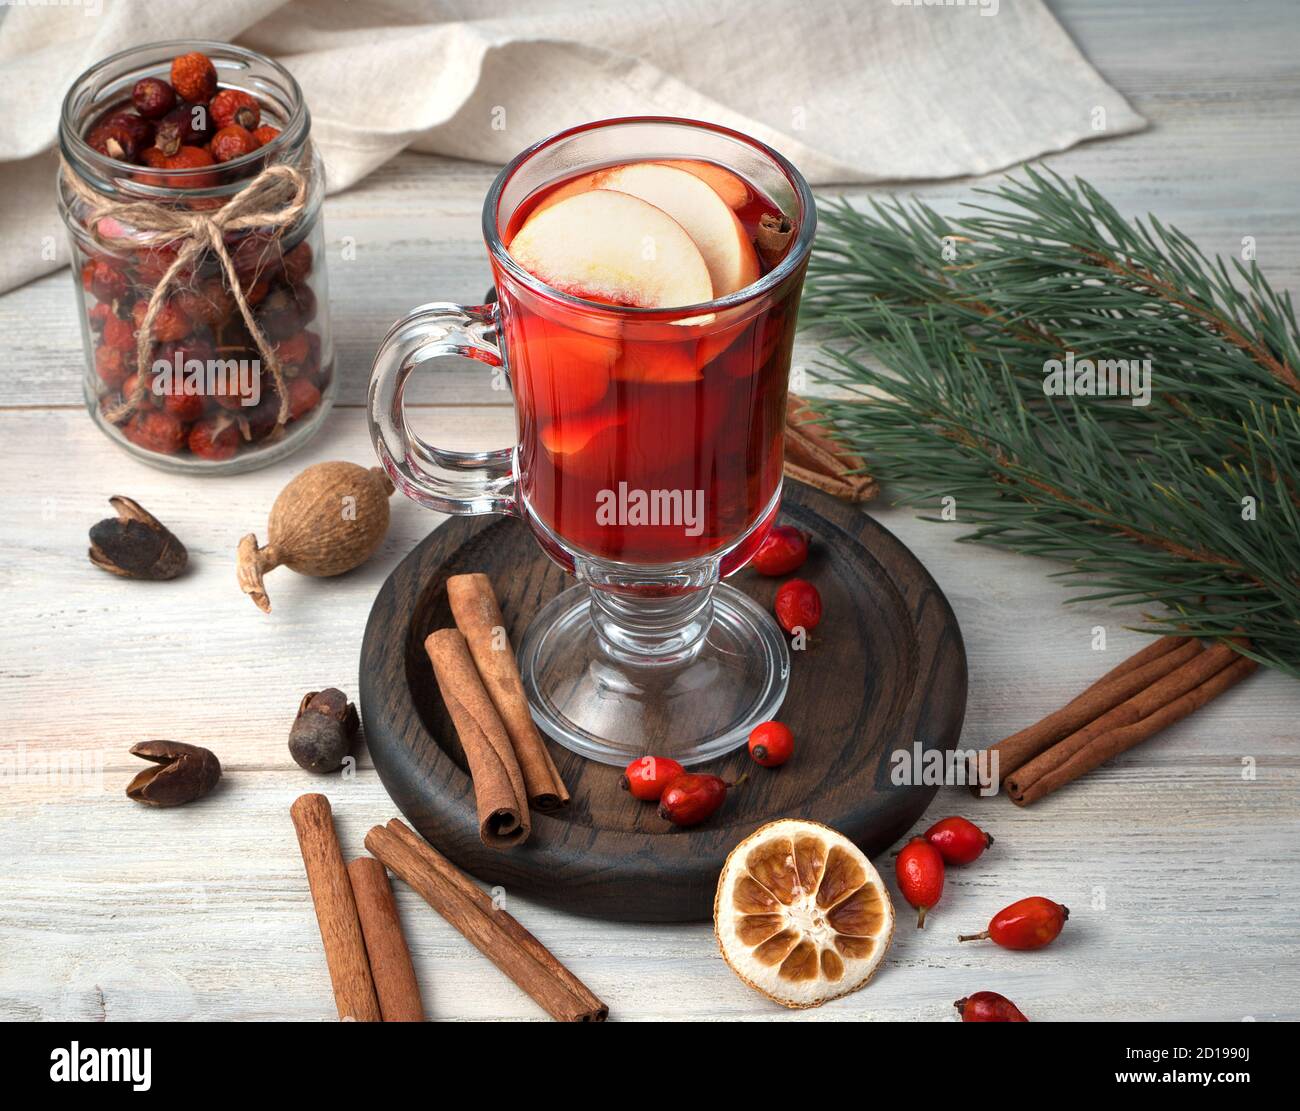 A glass of mulled wine with fruit, cinnamon and pine branches on a wooden background. Stock Photo